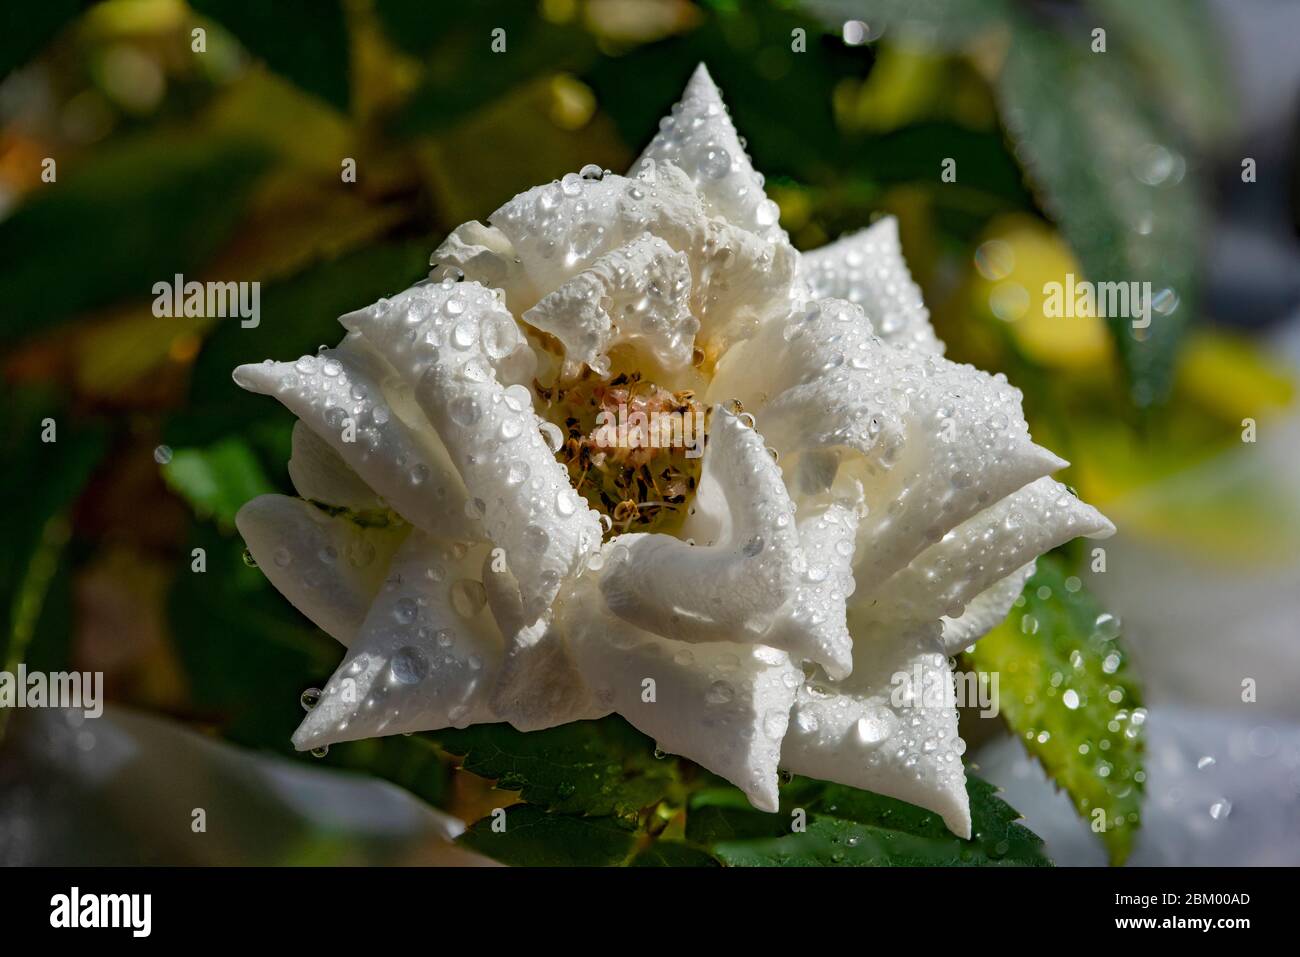 Miniature white rose covered in water droplets,close up,macro shot,focus stacked Stock Photo